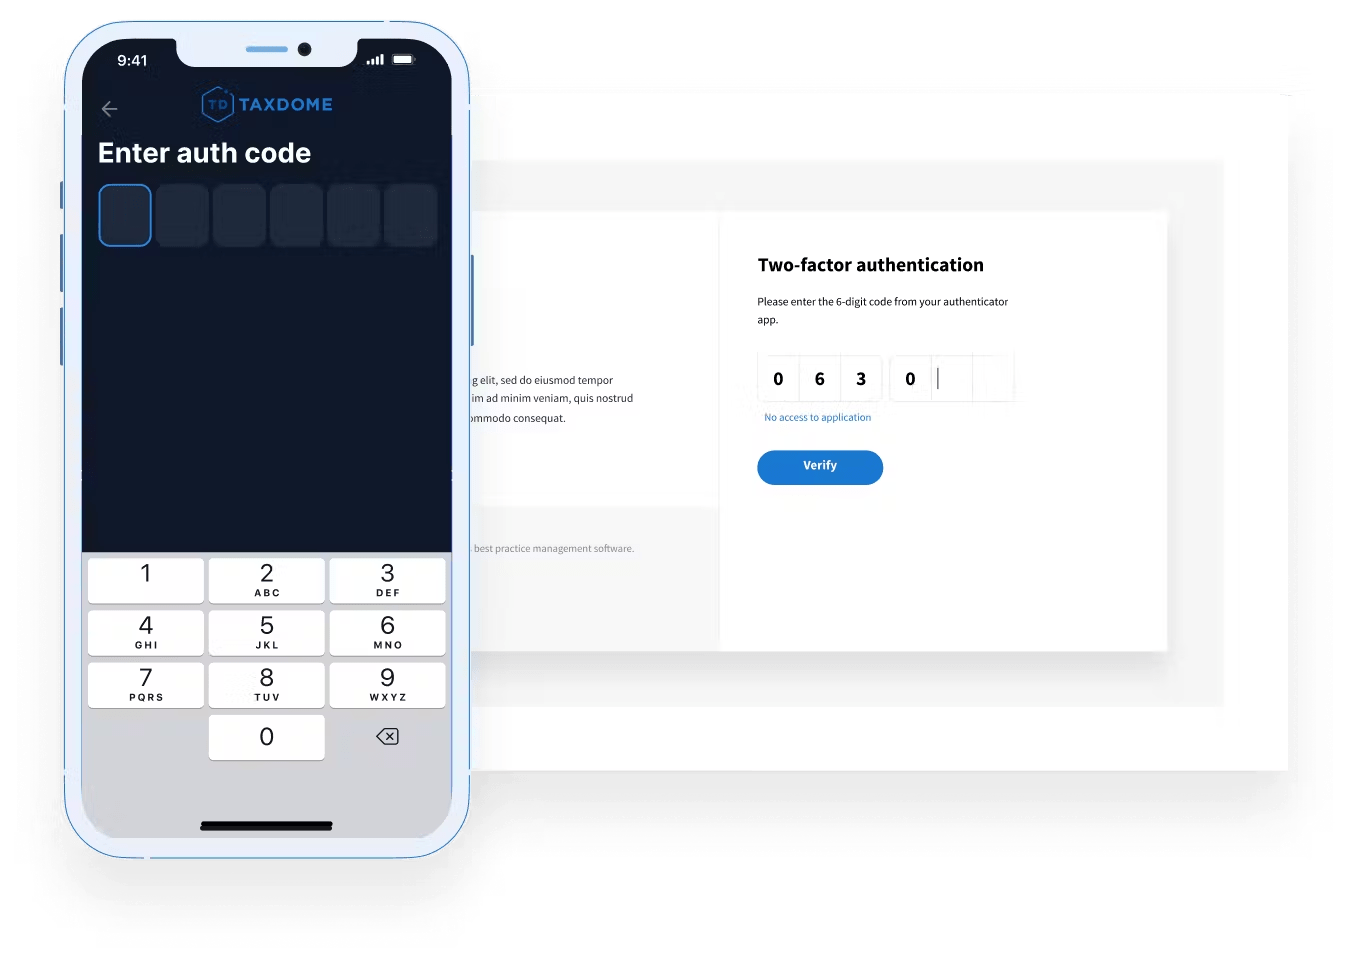 An image displaying TaxDome's security feature—two-factor authentication.